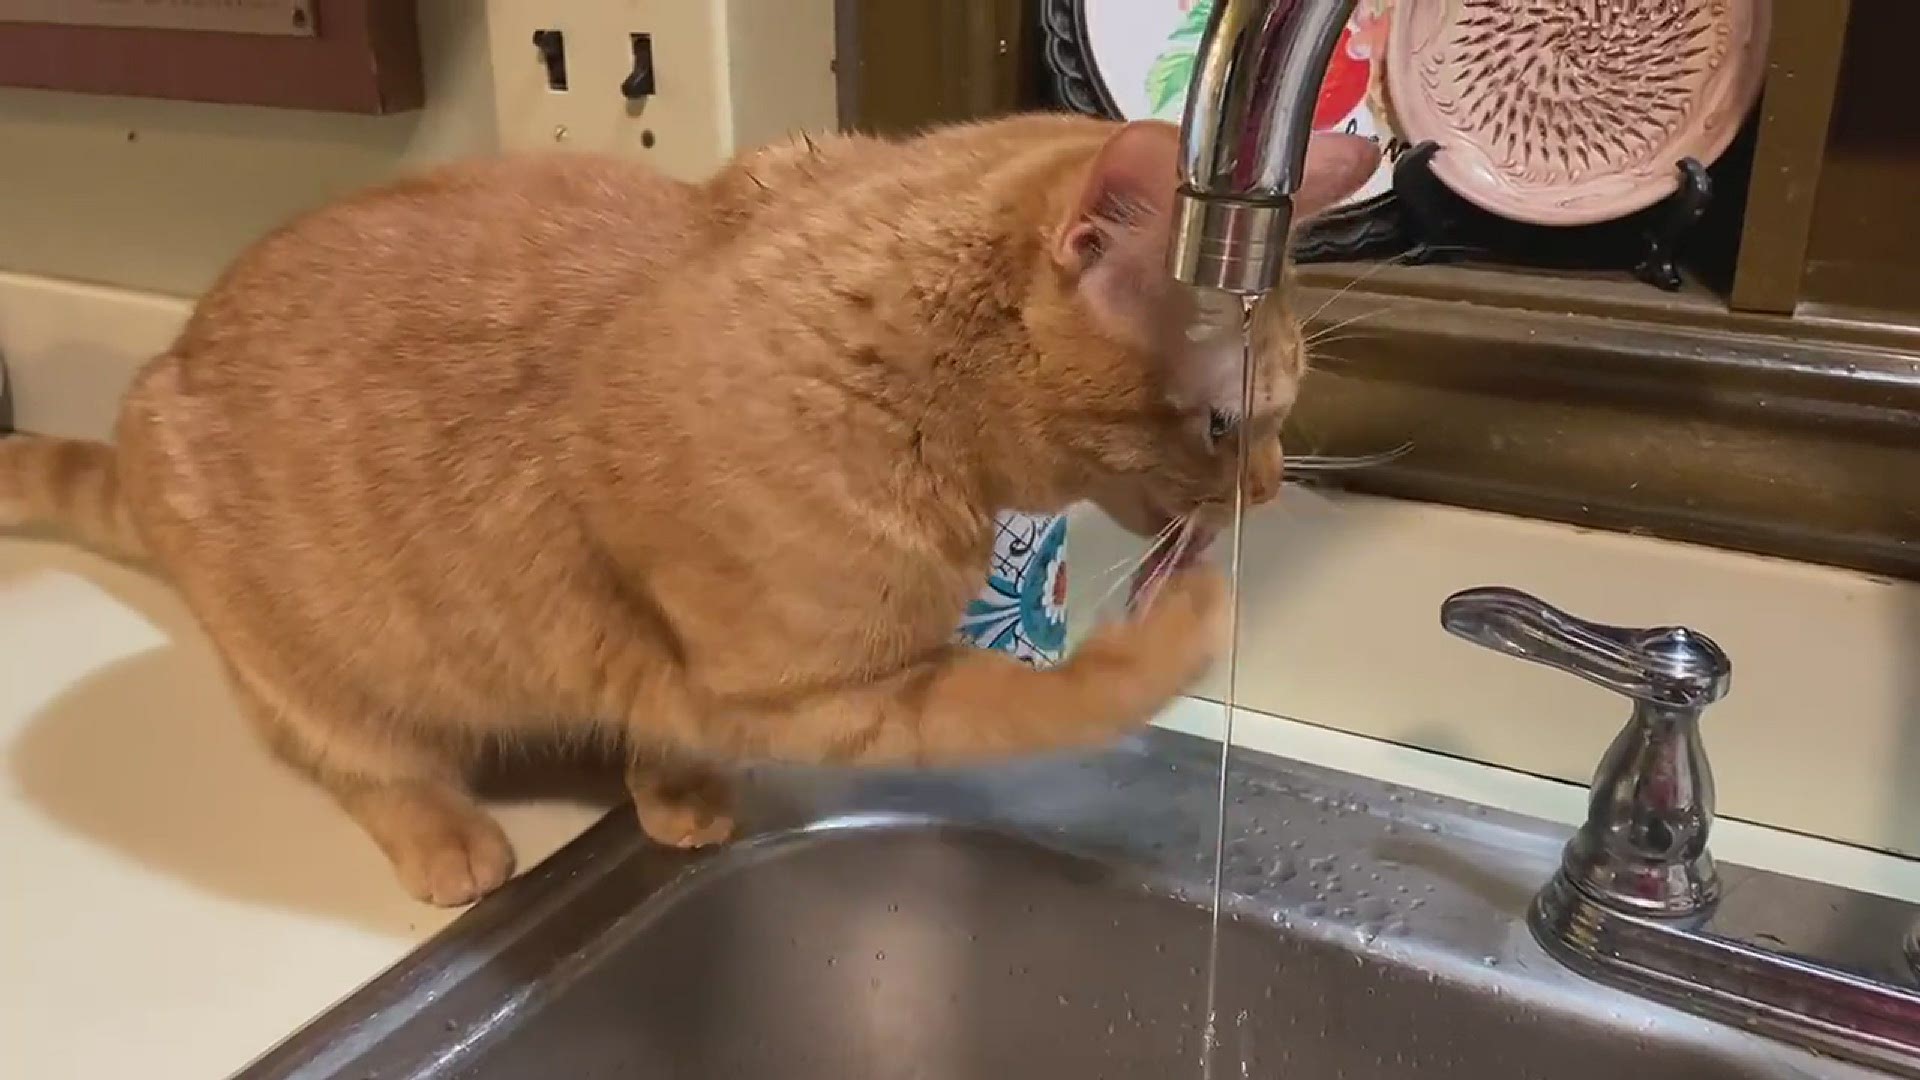 Nala (yes, named from The Lion King), enjoys running water, especially from sinks and bath tubs
Credit: Ish Bardos